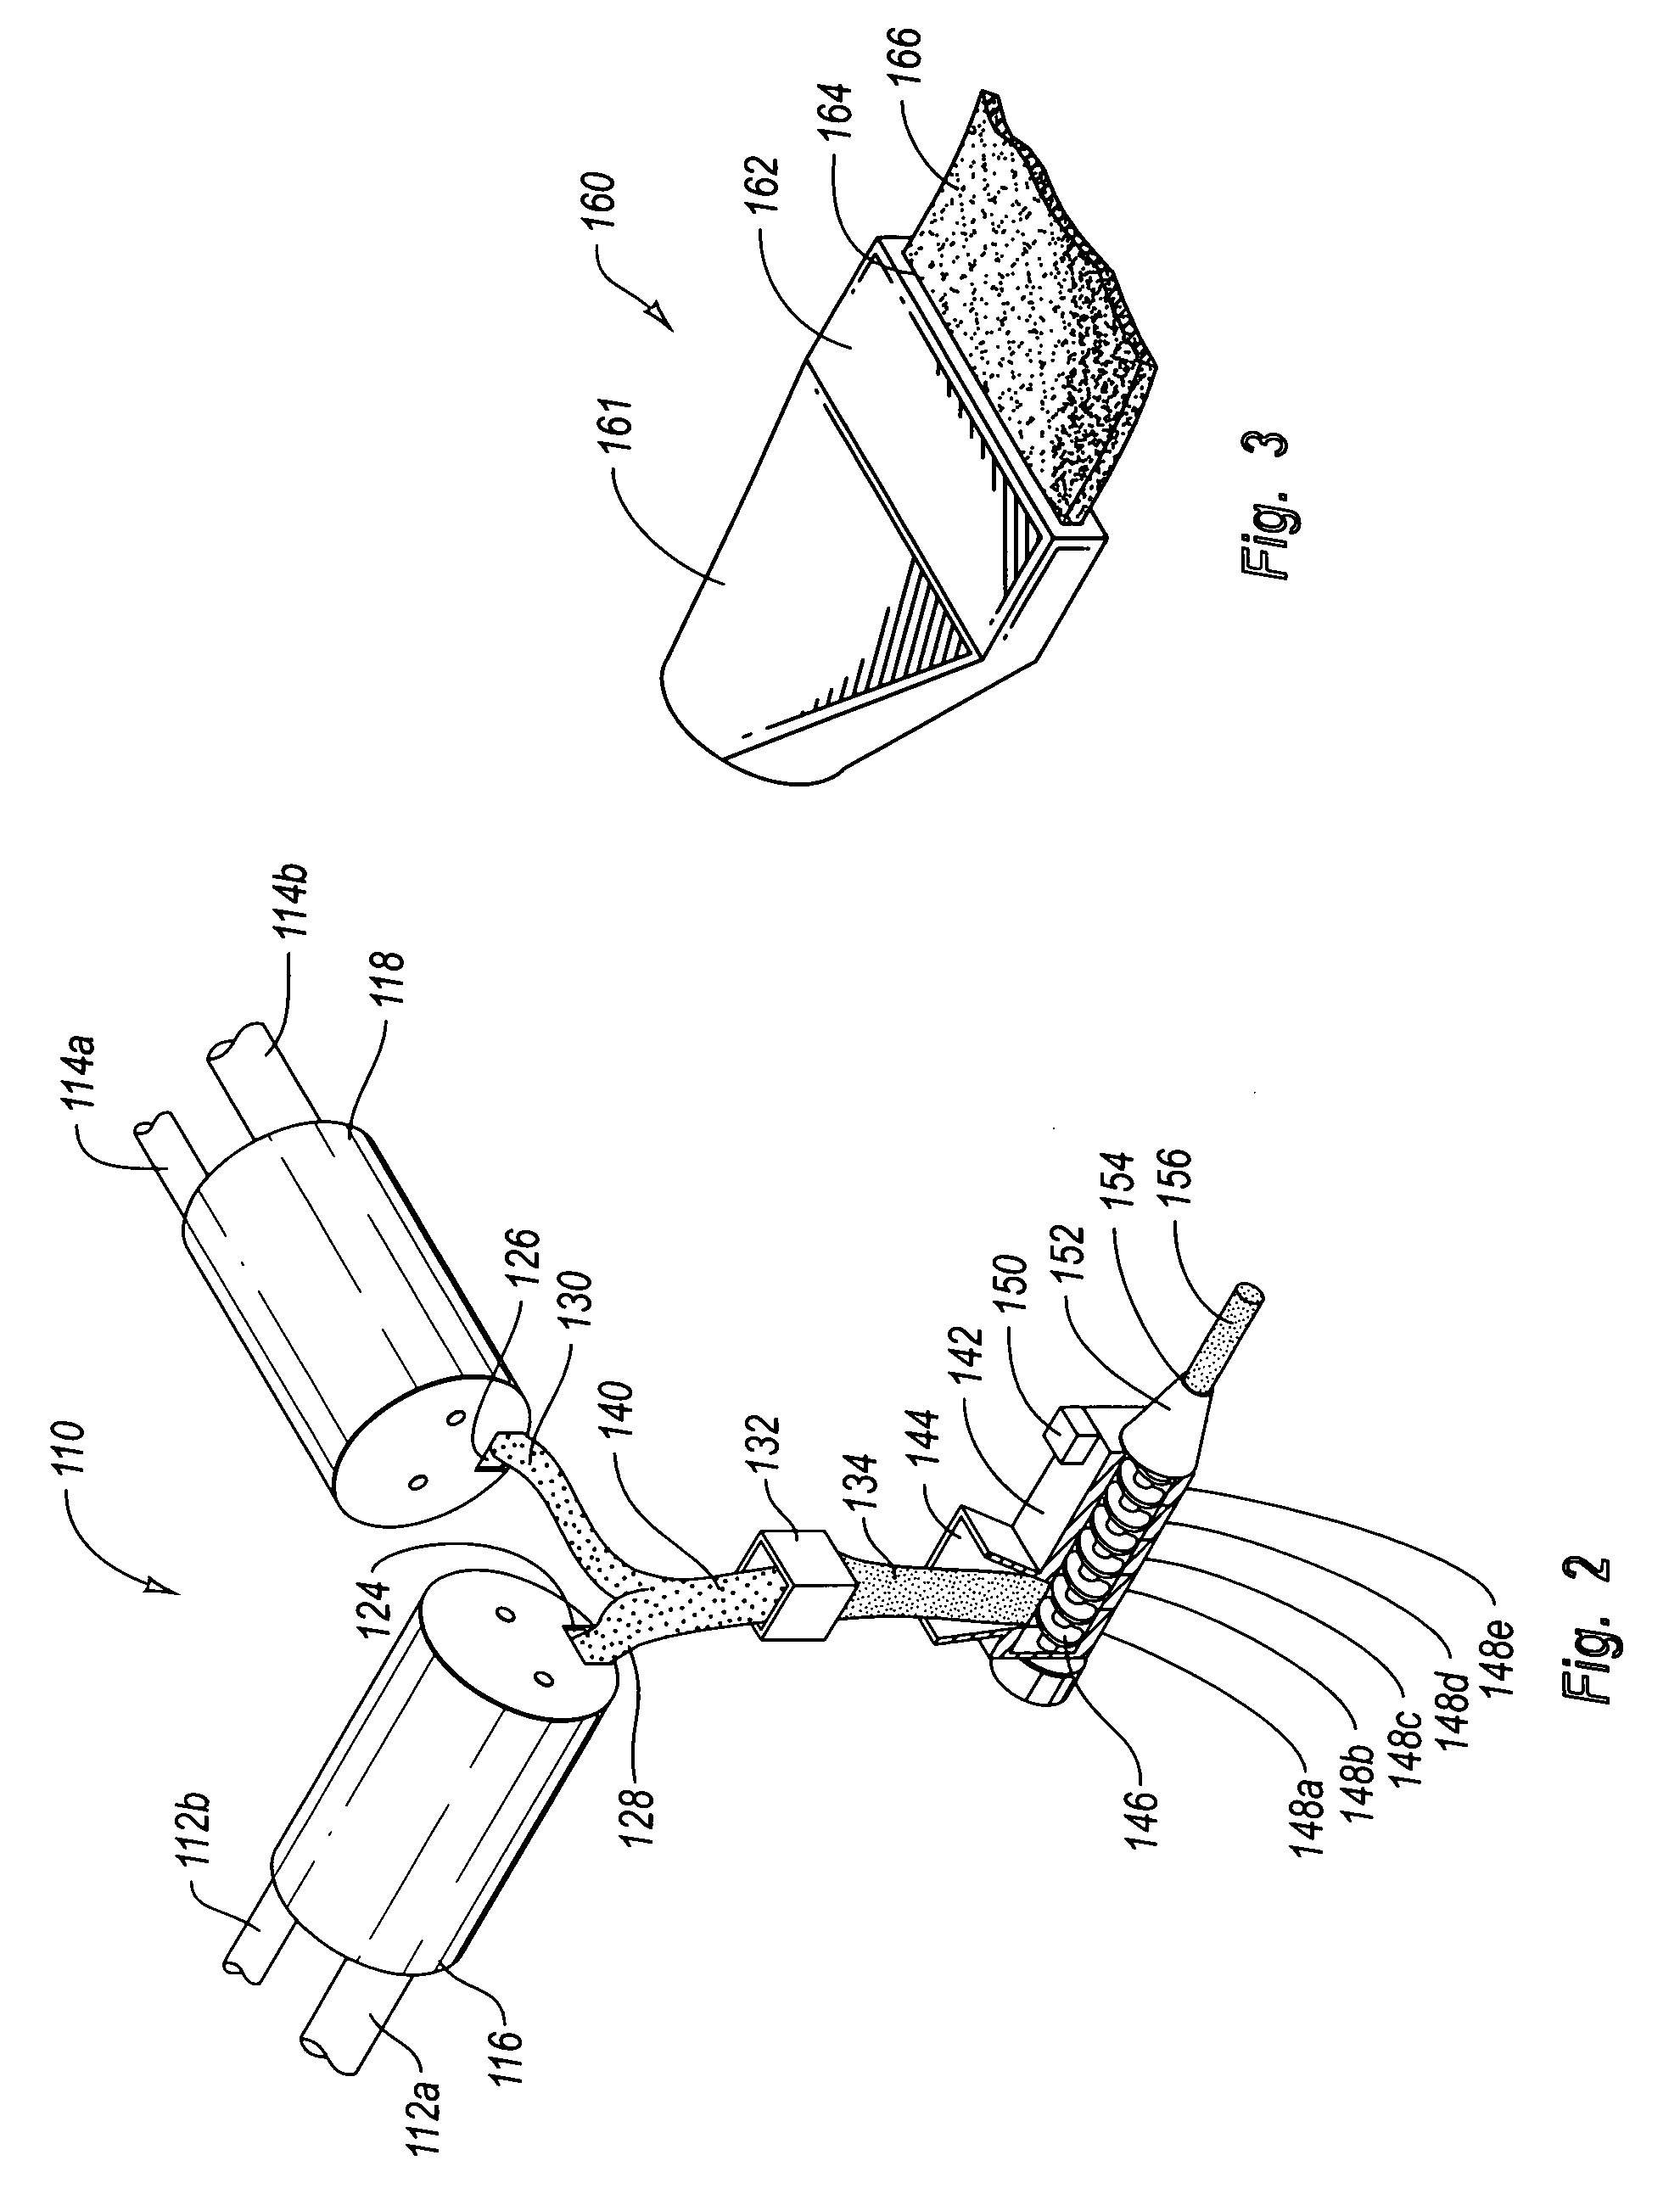 Fiber-reinforced starch-based compositions and methods of manufacture and use